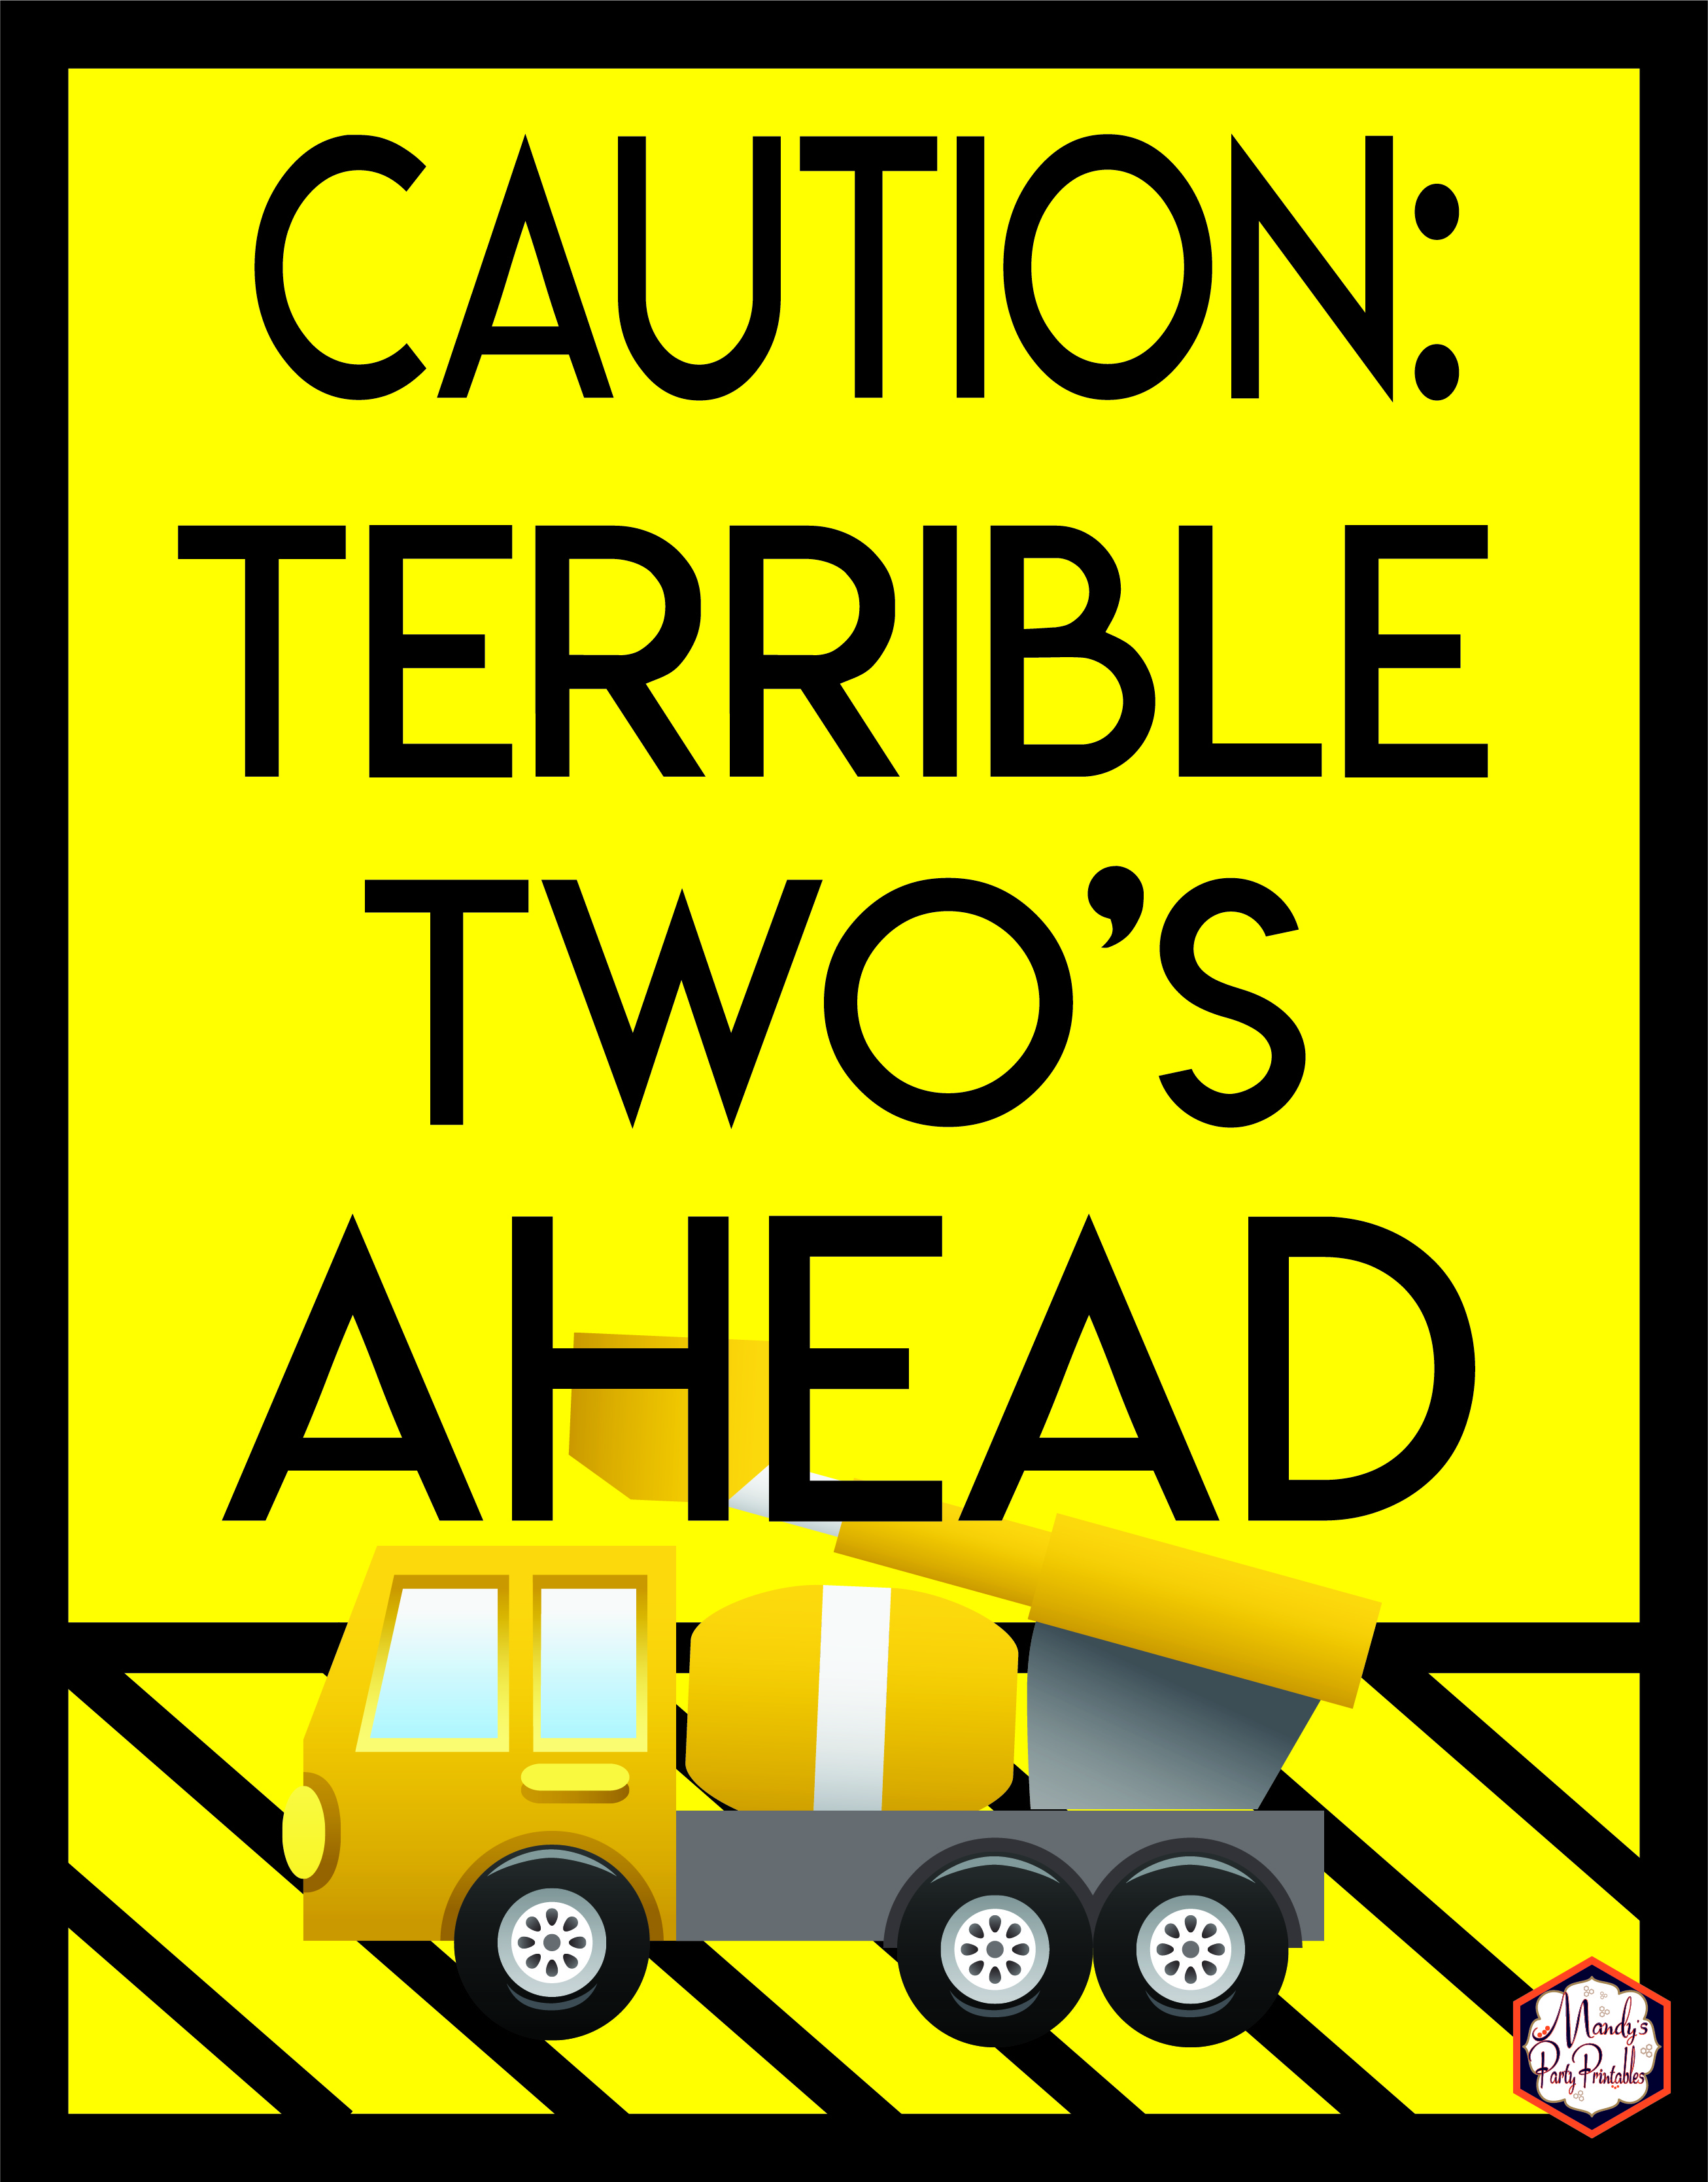 Caution: Terrible Two's Ahead from Construction Birthday Party Printables via Mandy's Party Printables